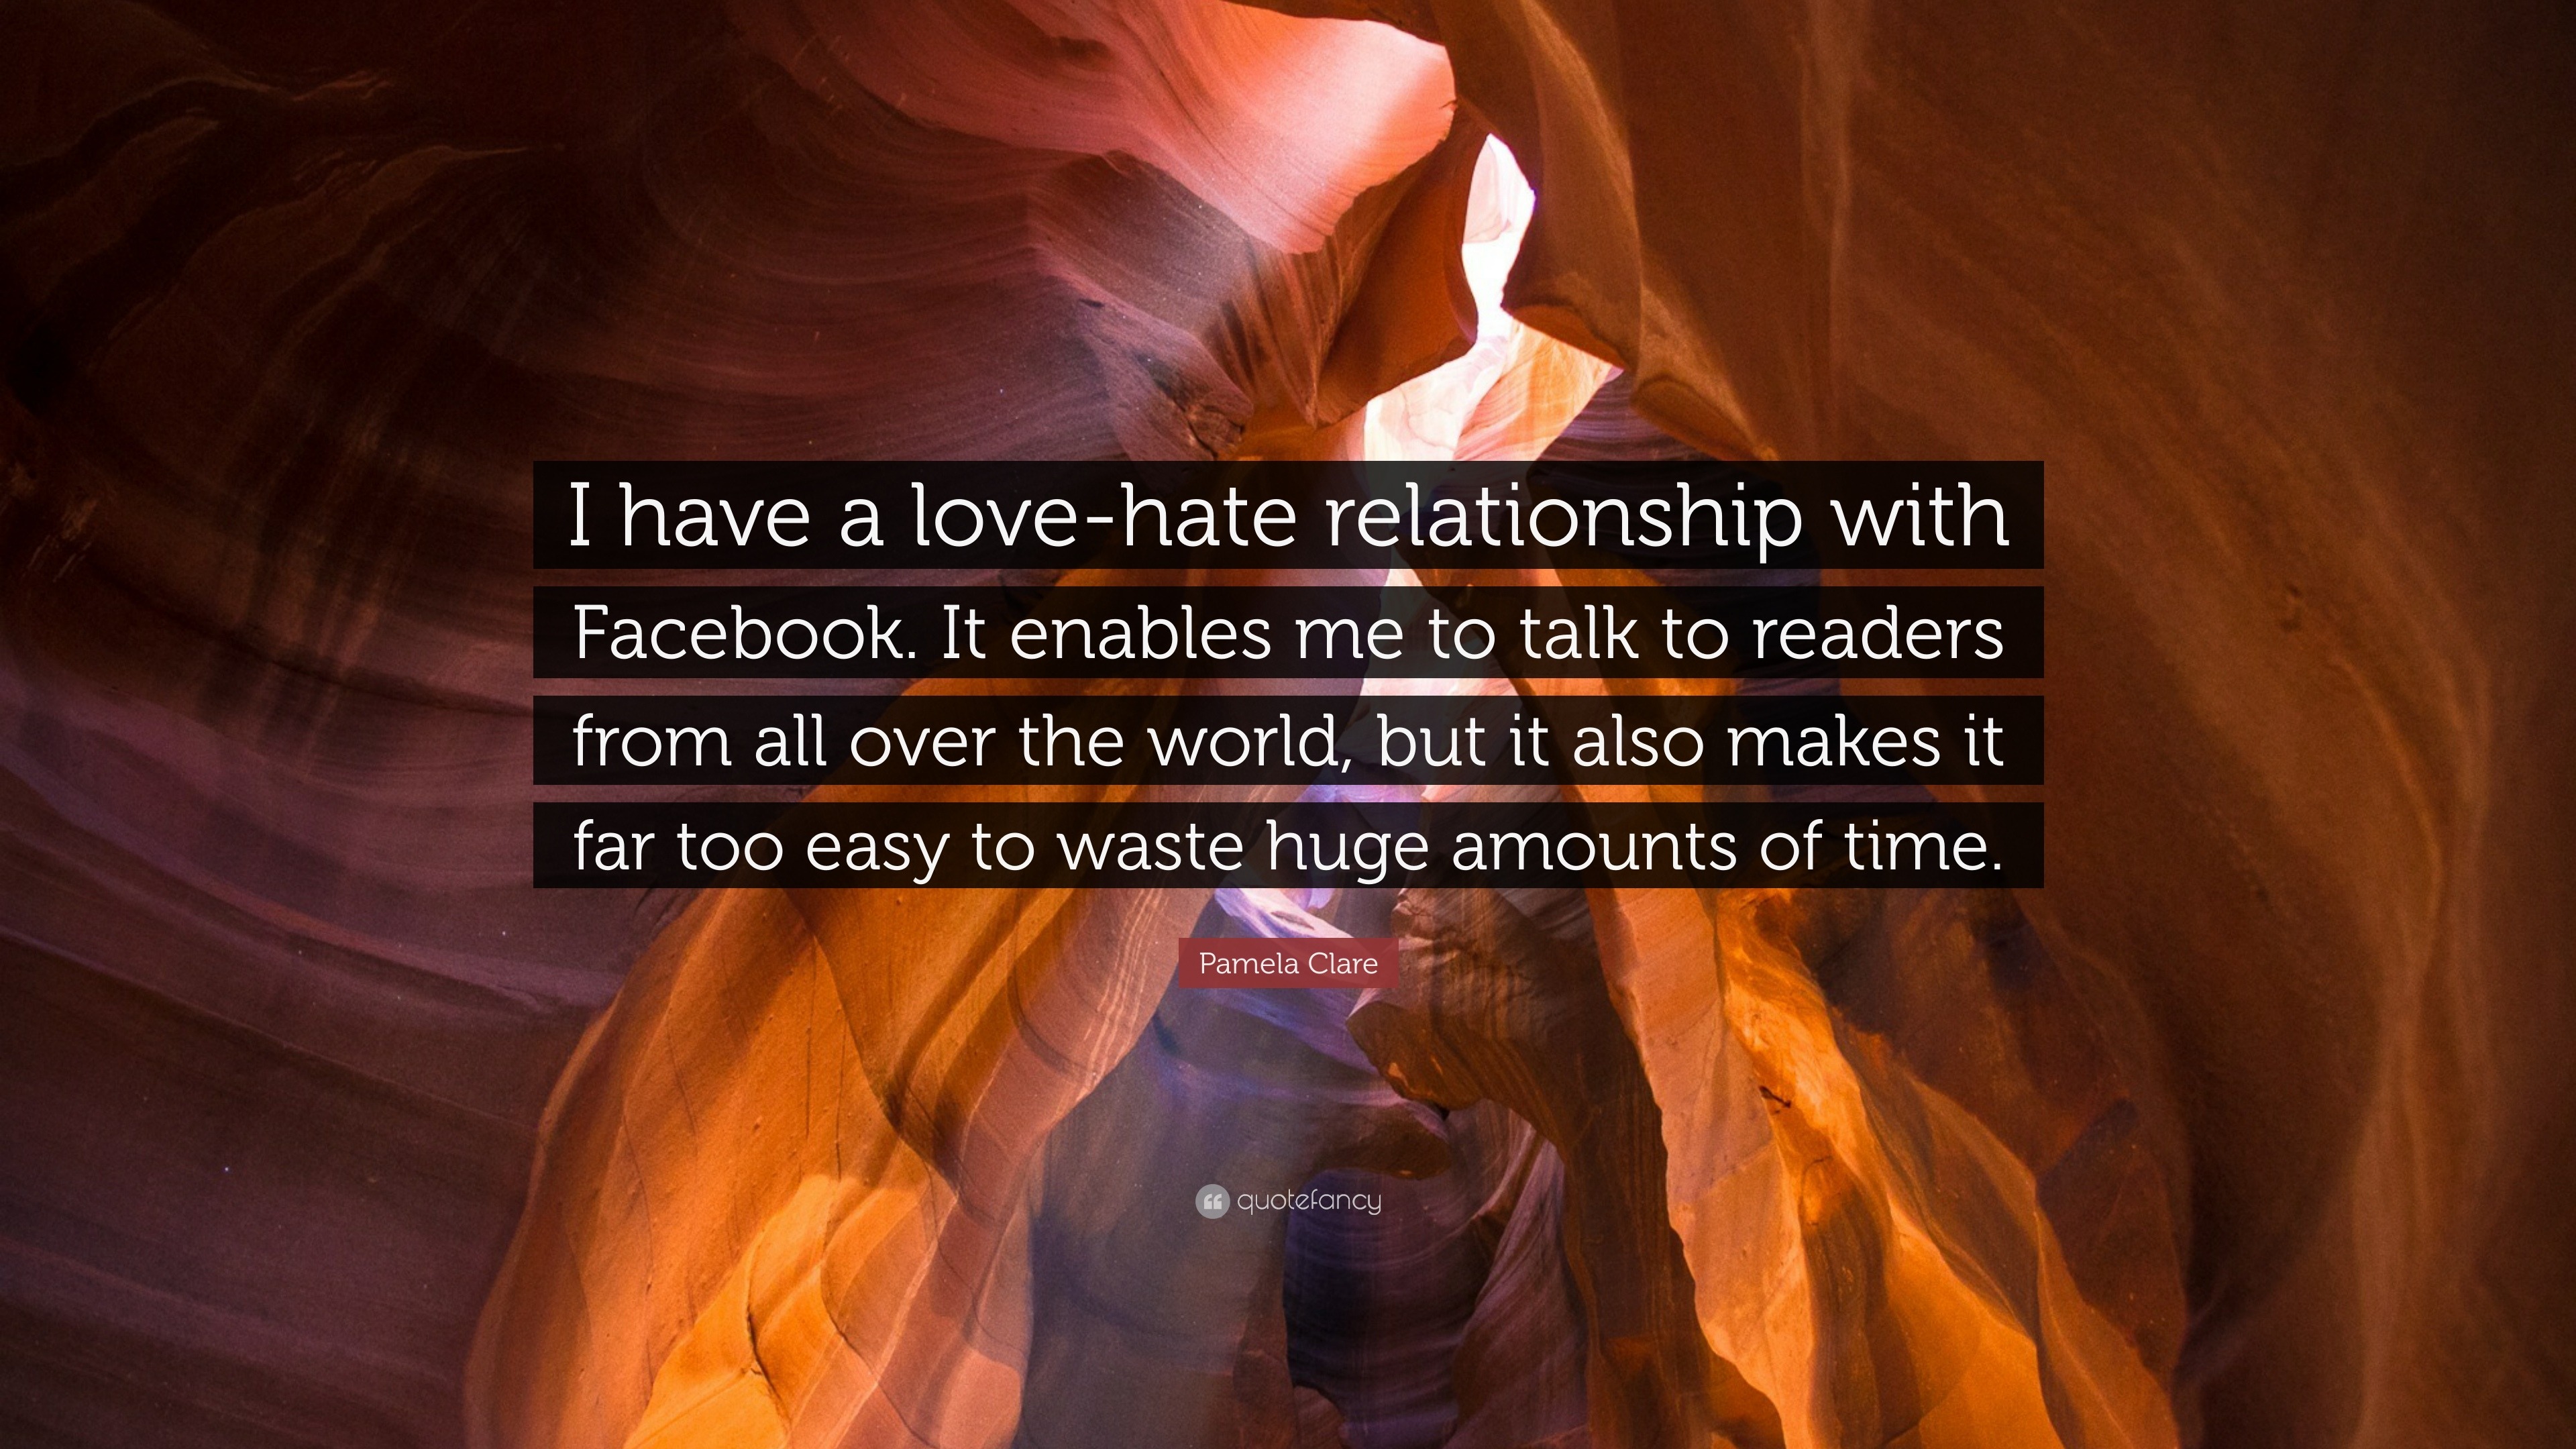 wallpaper for facebook with quotes of love